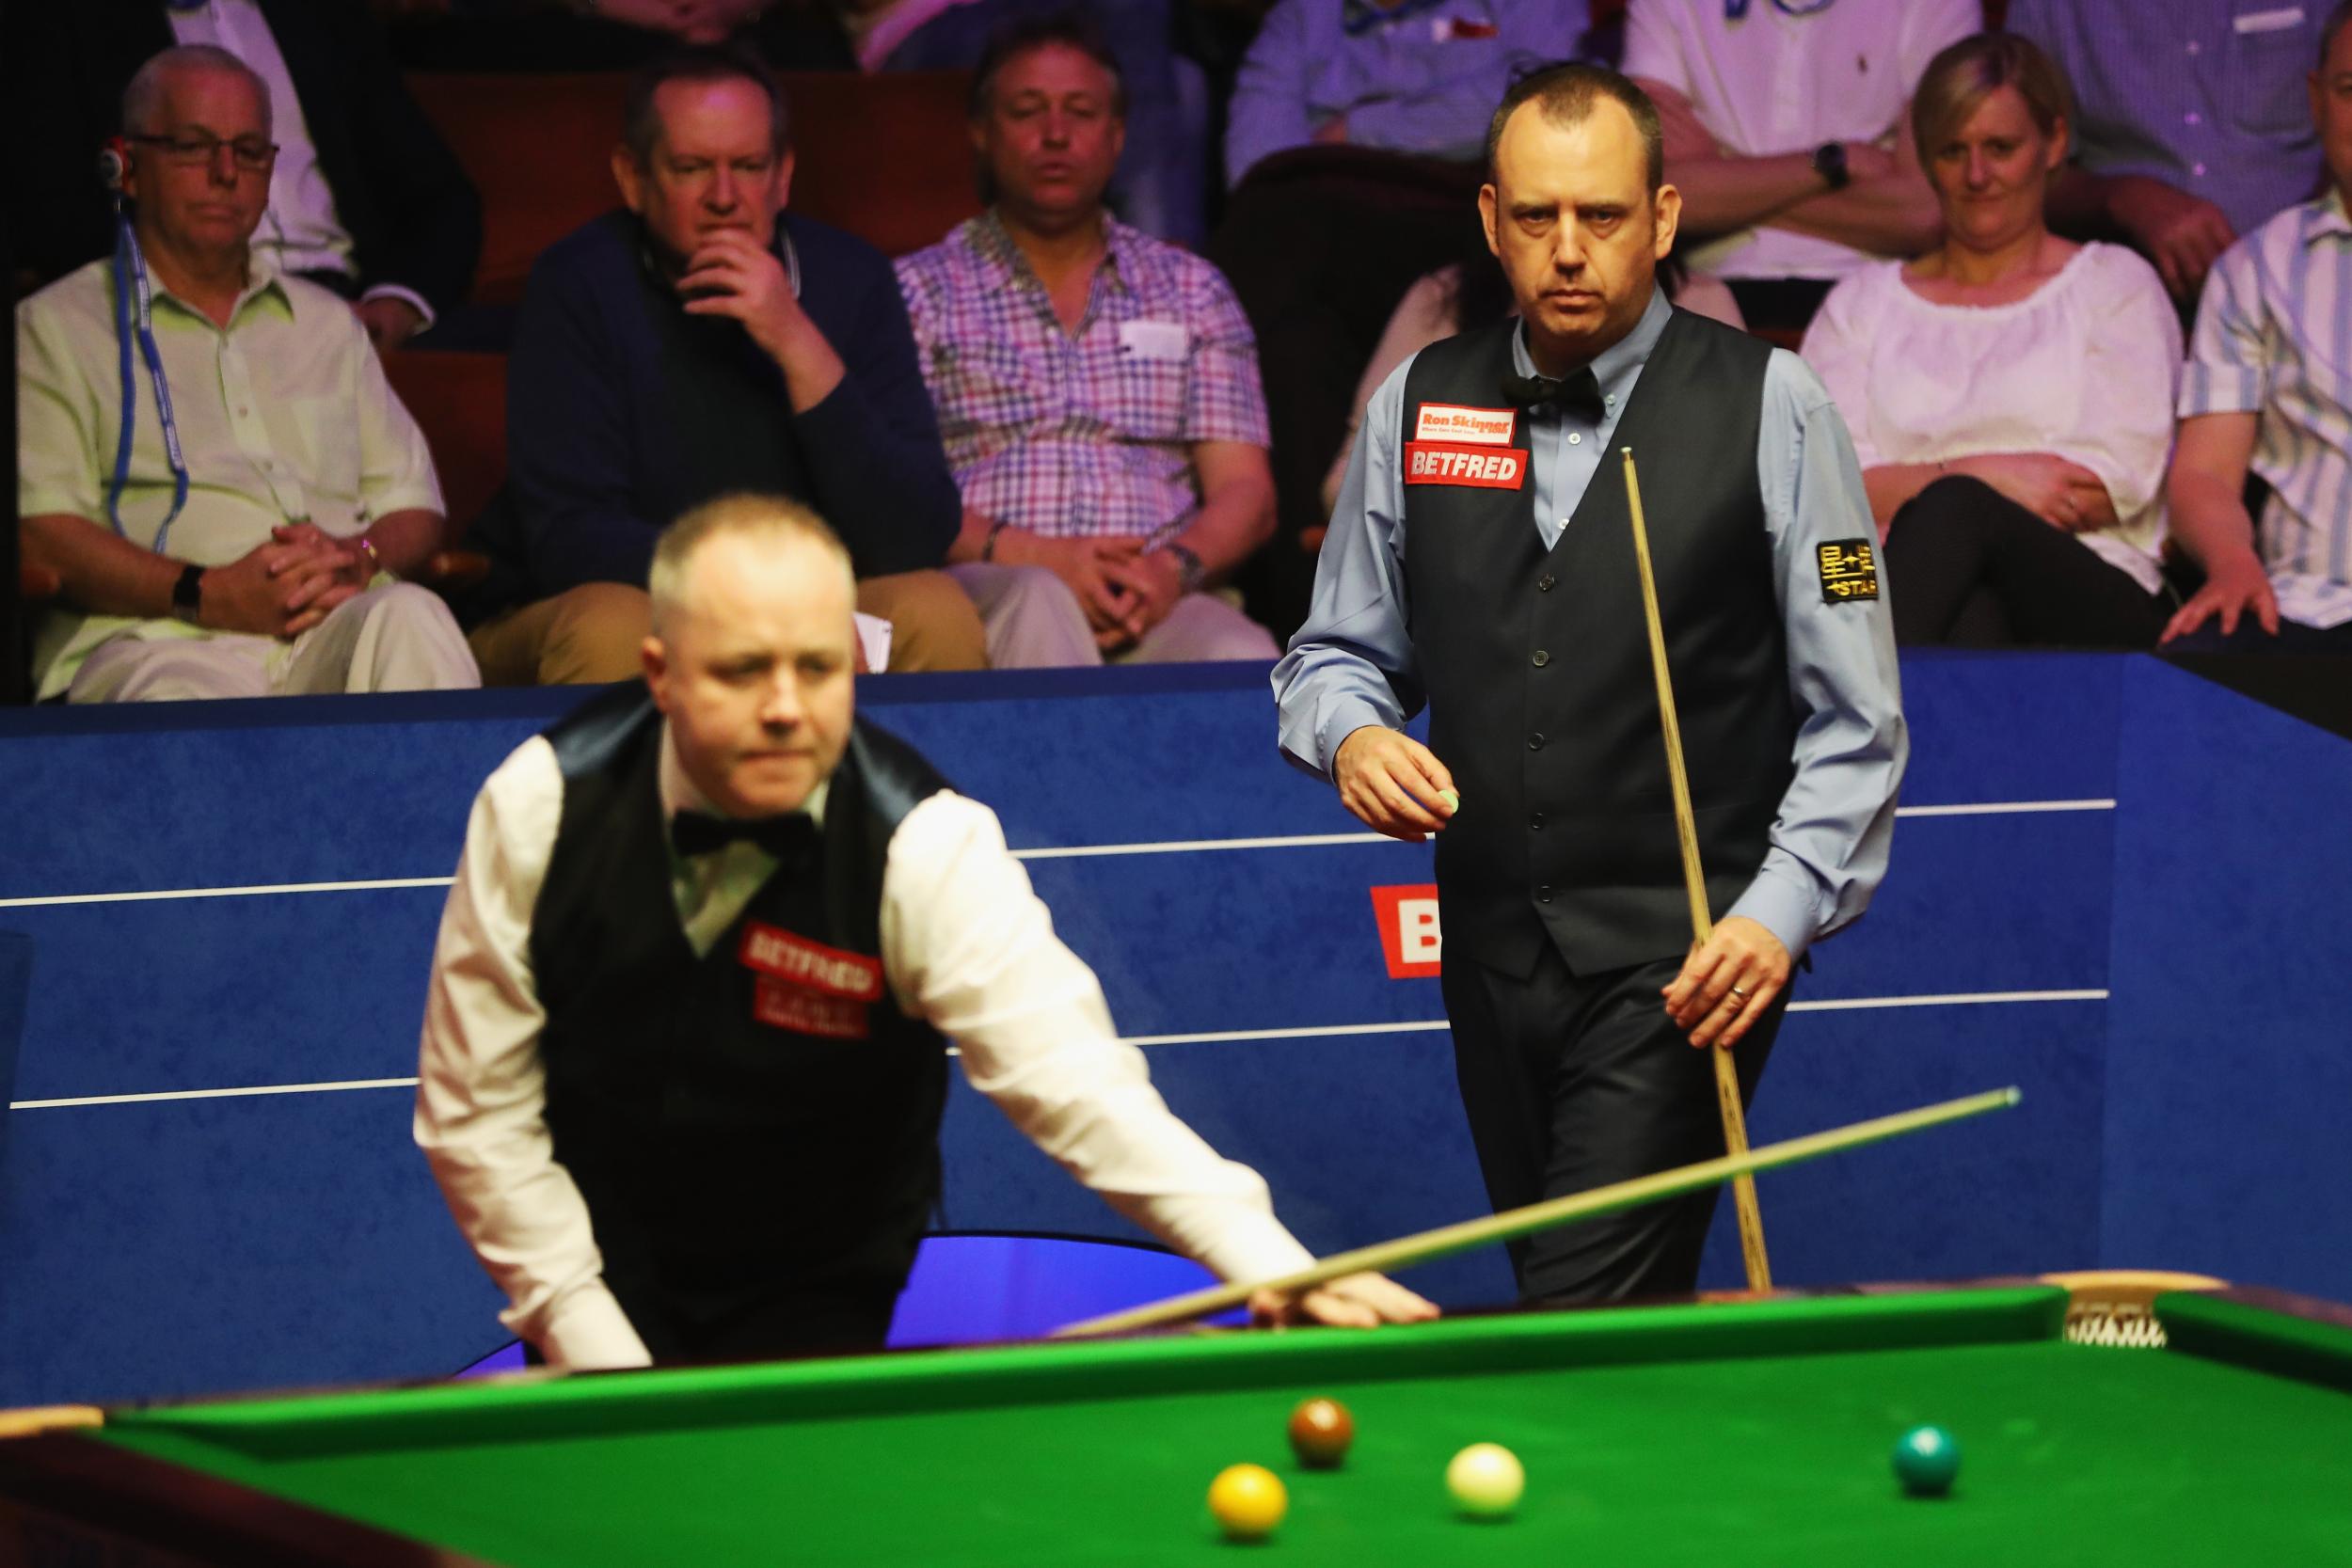 Playful Mark Williams races into early lead in World Snooker final but John Higgins fights back to stay in touch The Independent The Independent